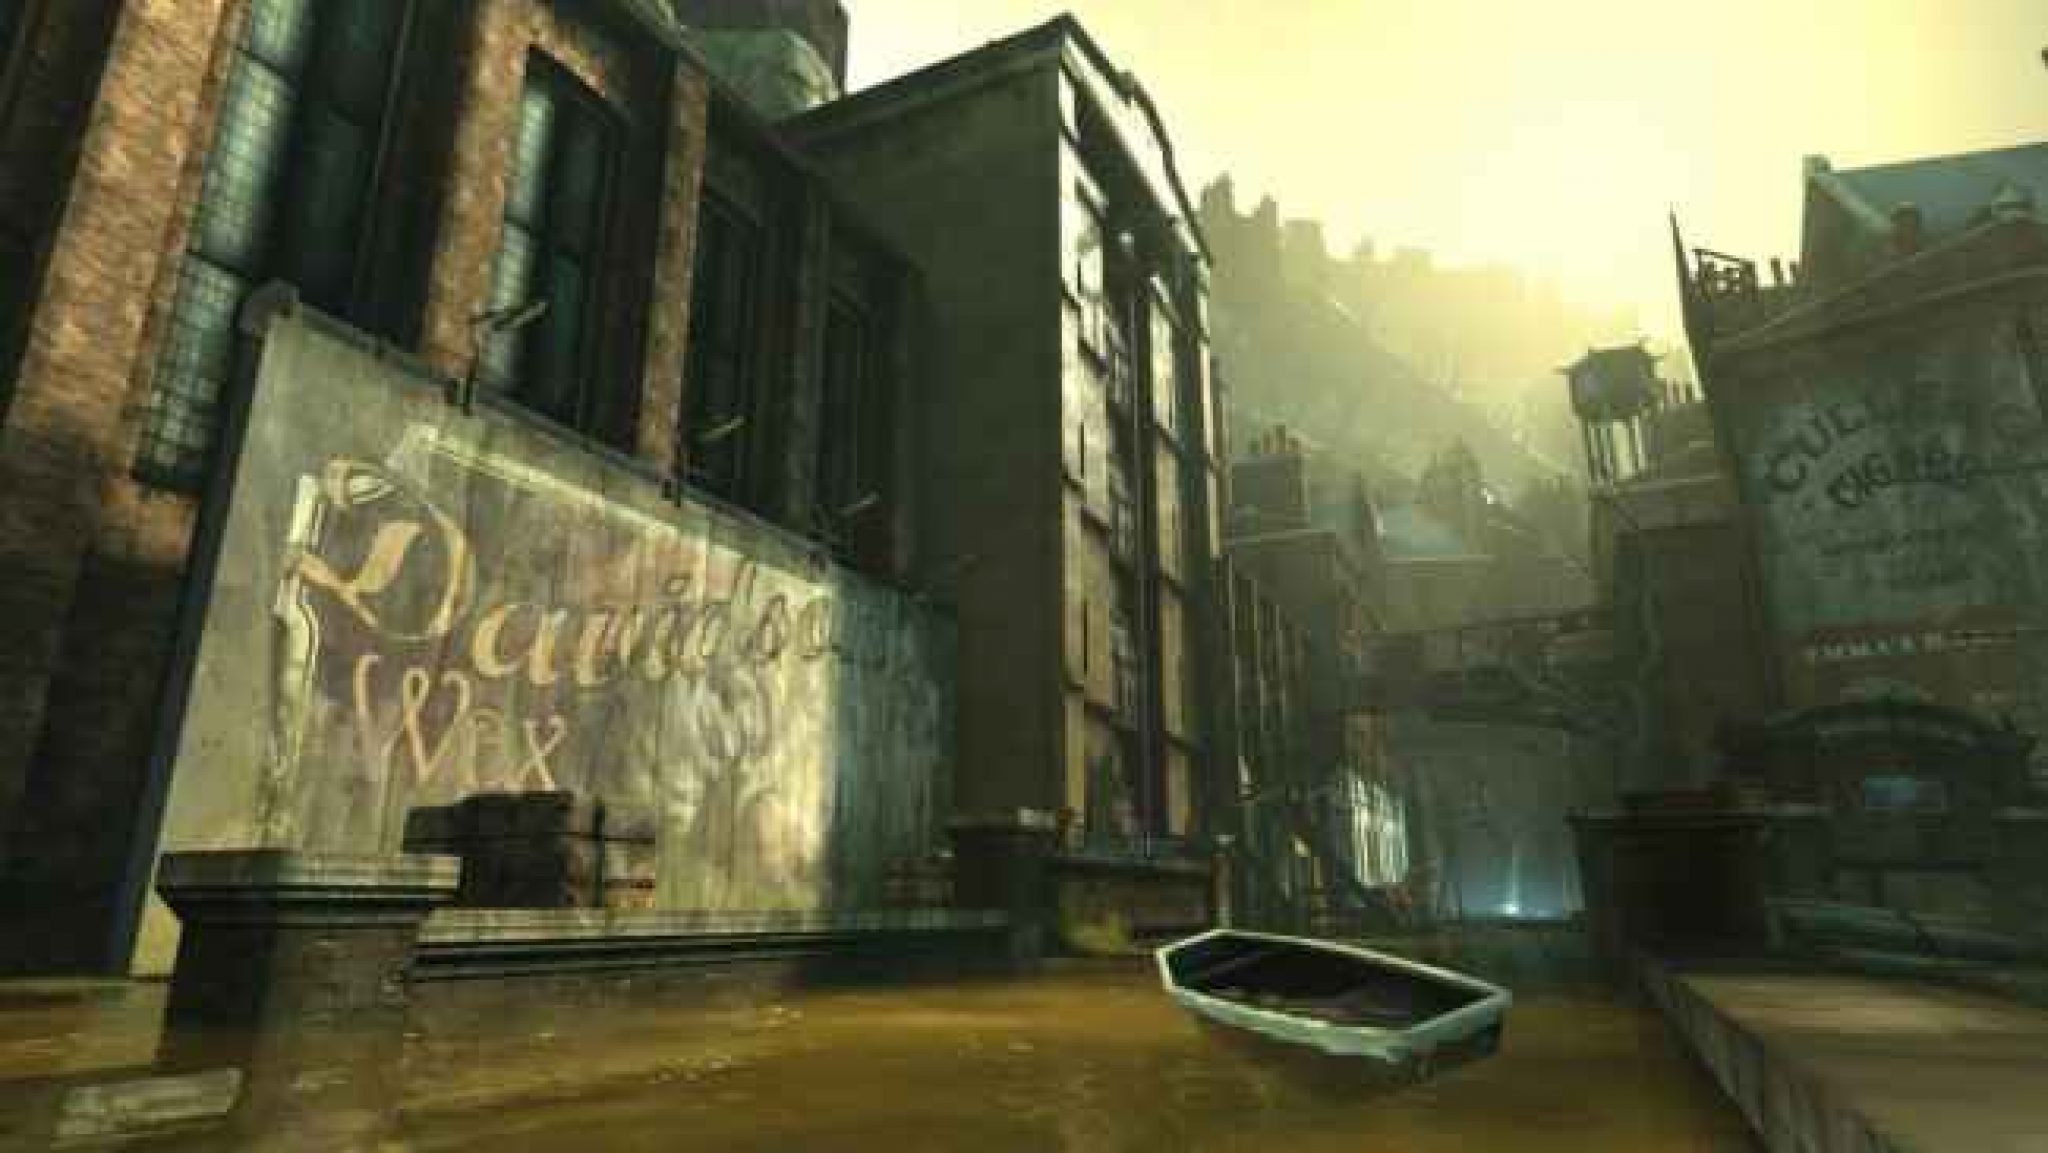 download dishonored pc